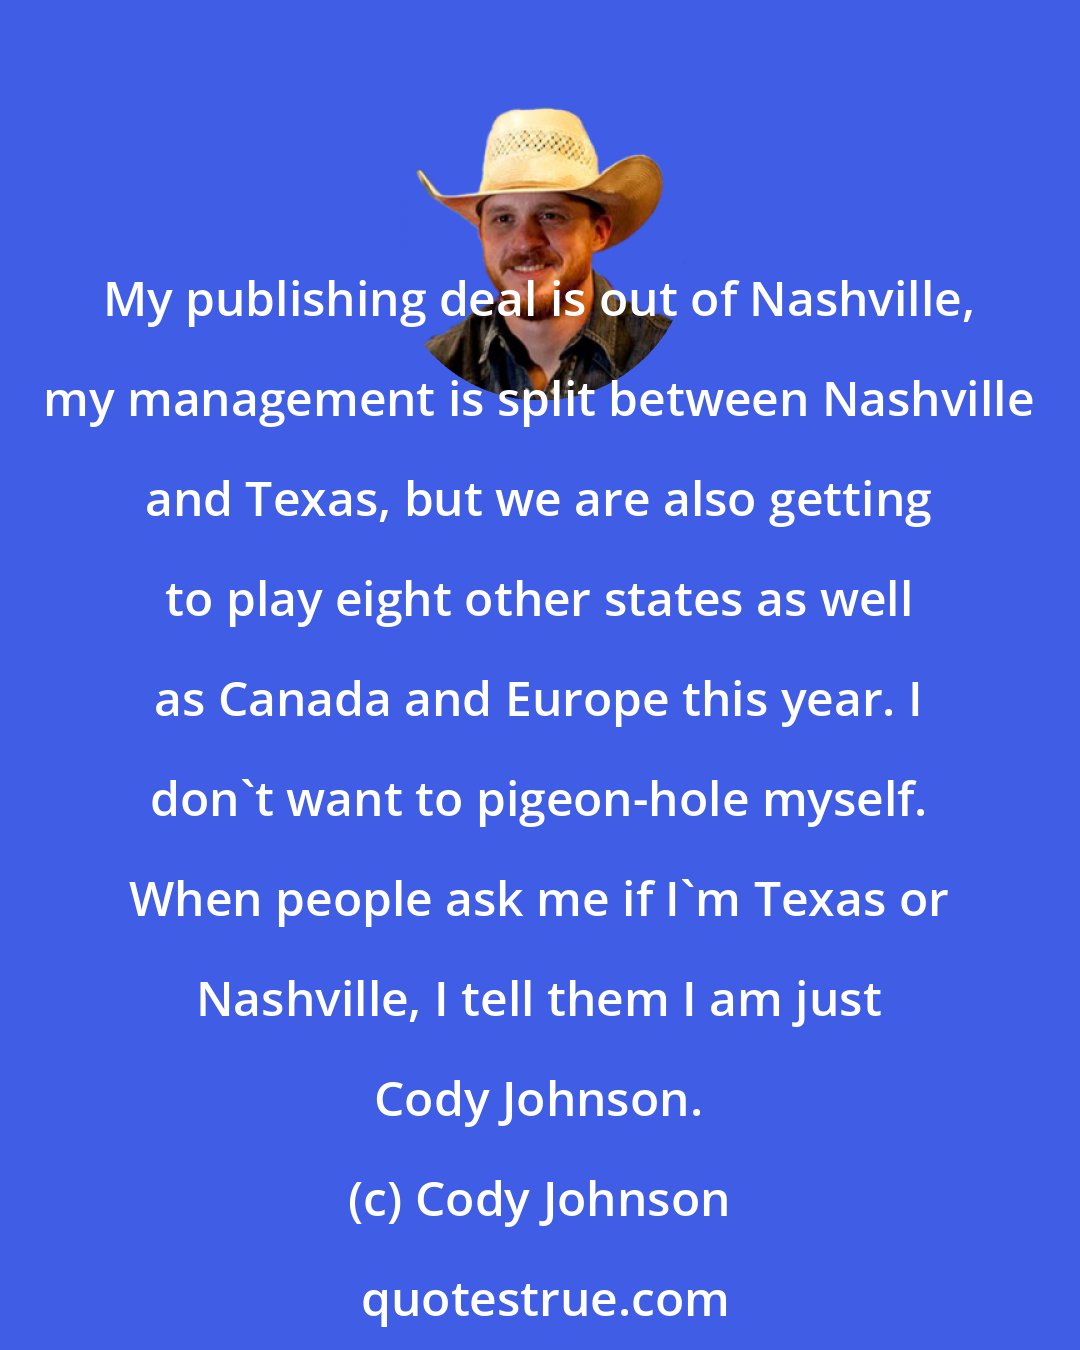 Cody Johnson: My publishing deal is out of Nashville, my management is split between Nashville and Texas, but we are also getting to play eight other states as well as Canada and Europe this year. I don't want to pigeon-hole myself. When people ask me if I'm Texas or Nashville, I tell them I am just Cody Johnson.